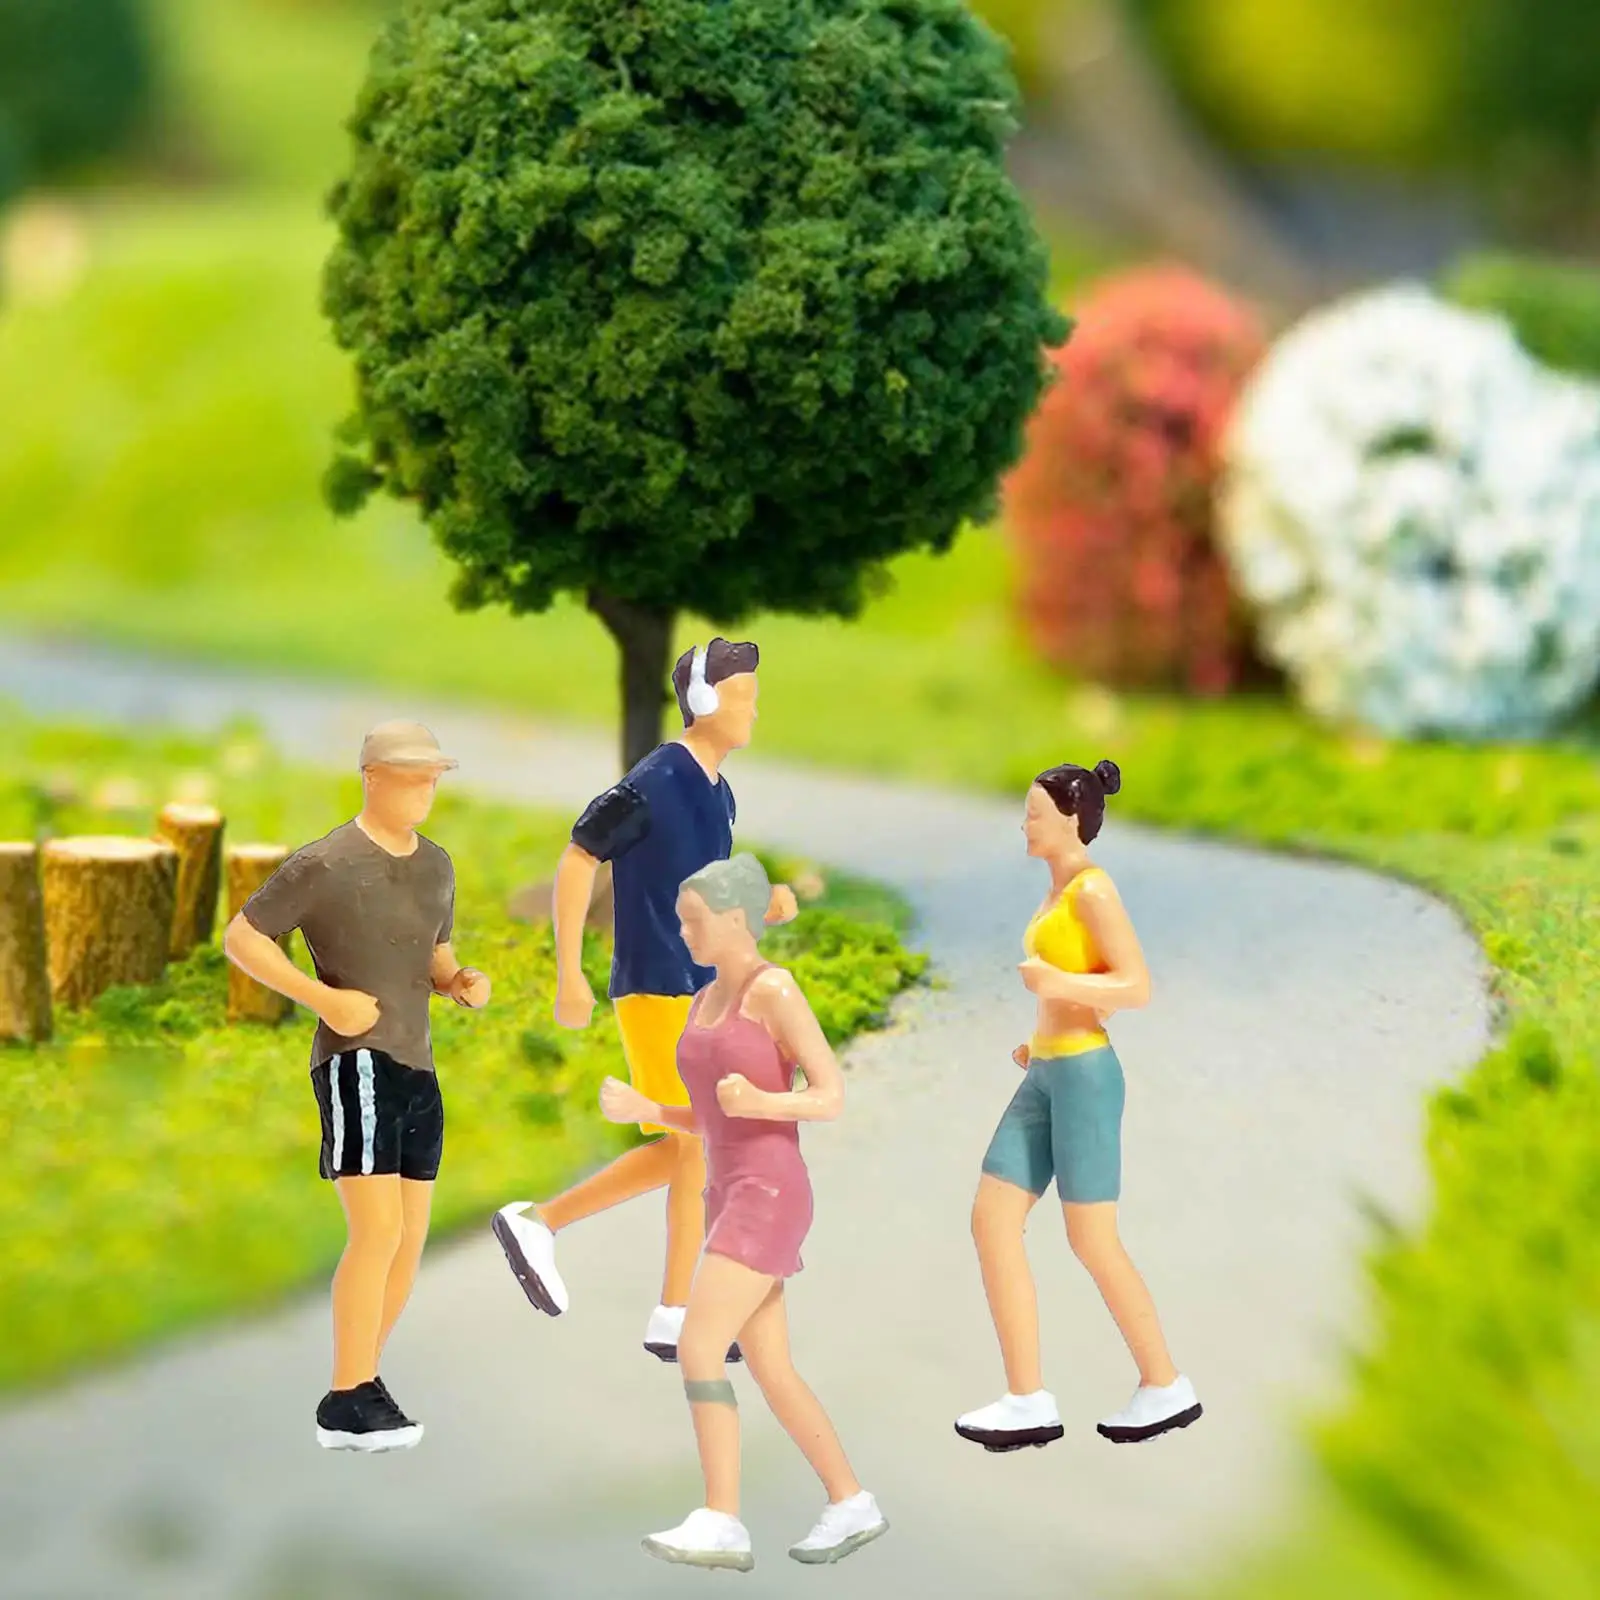 Sport Resin Figures of People Decor 1:87 Miniature Painted Figure Outdoor 1:87 Figures for Station Railway Layout Architectural